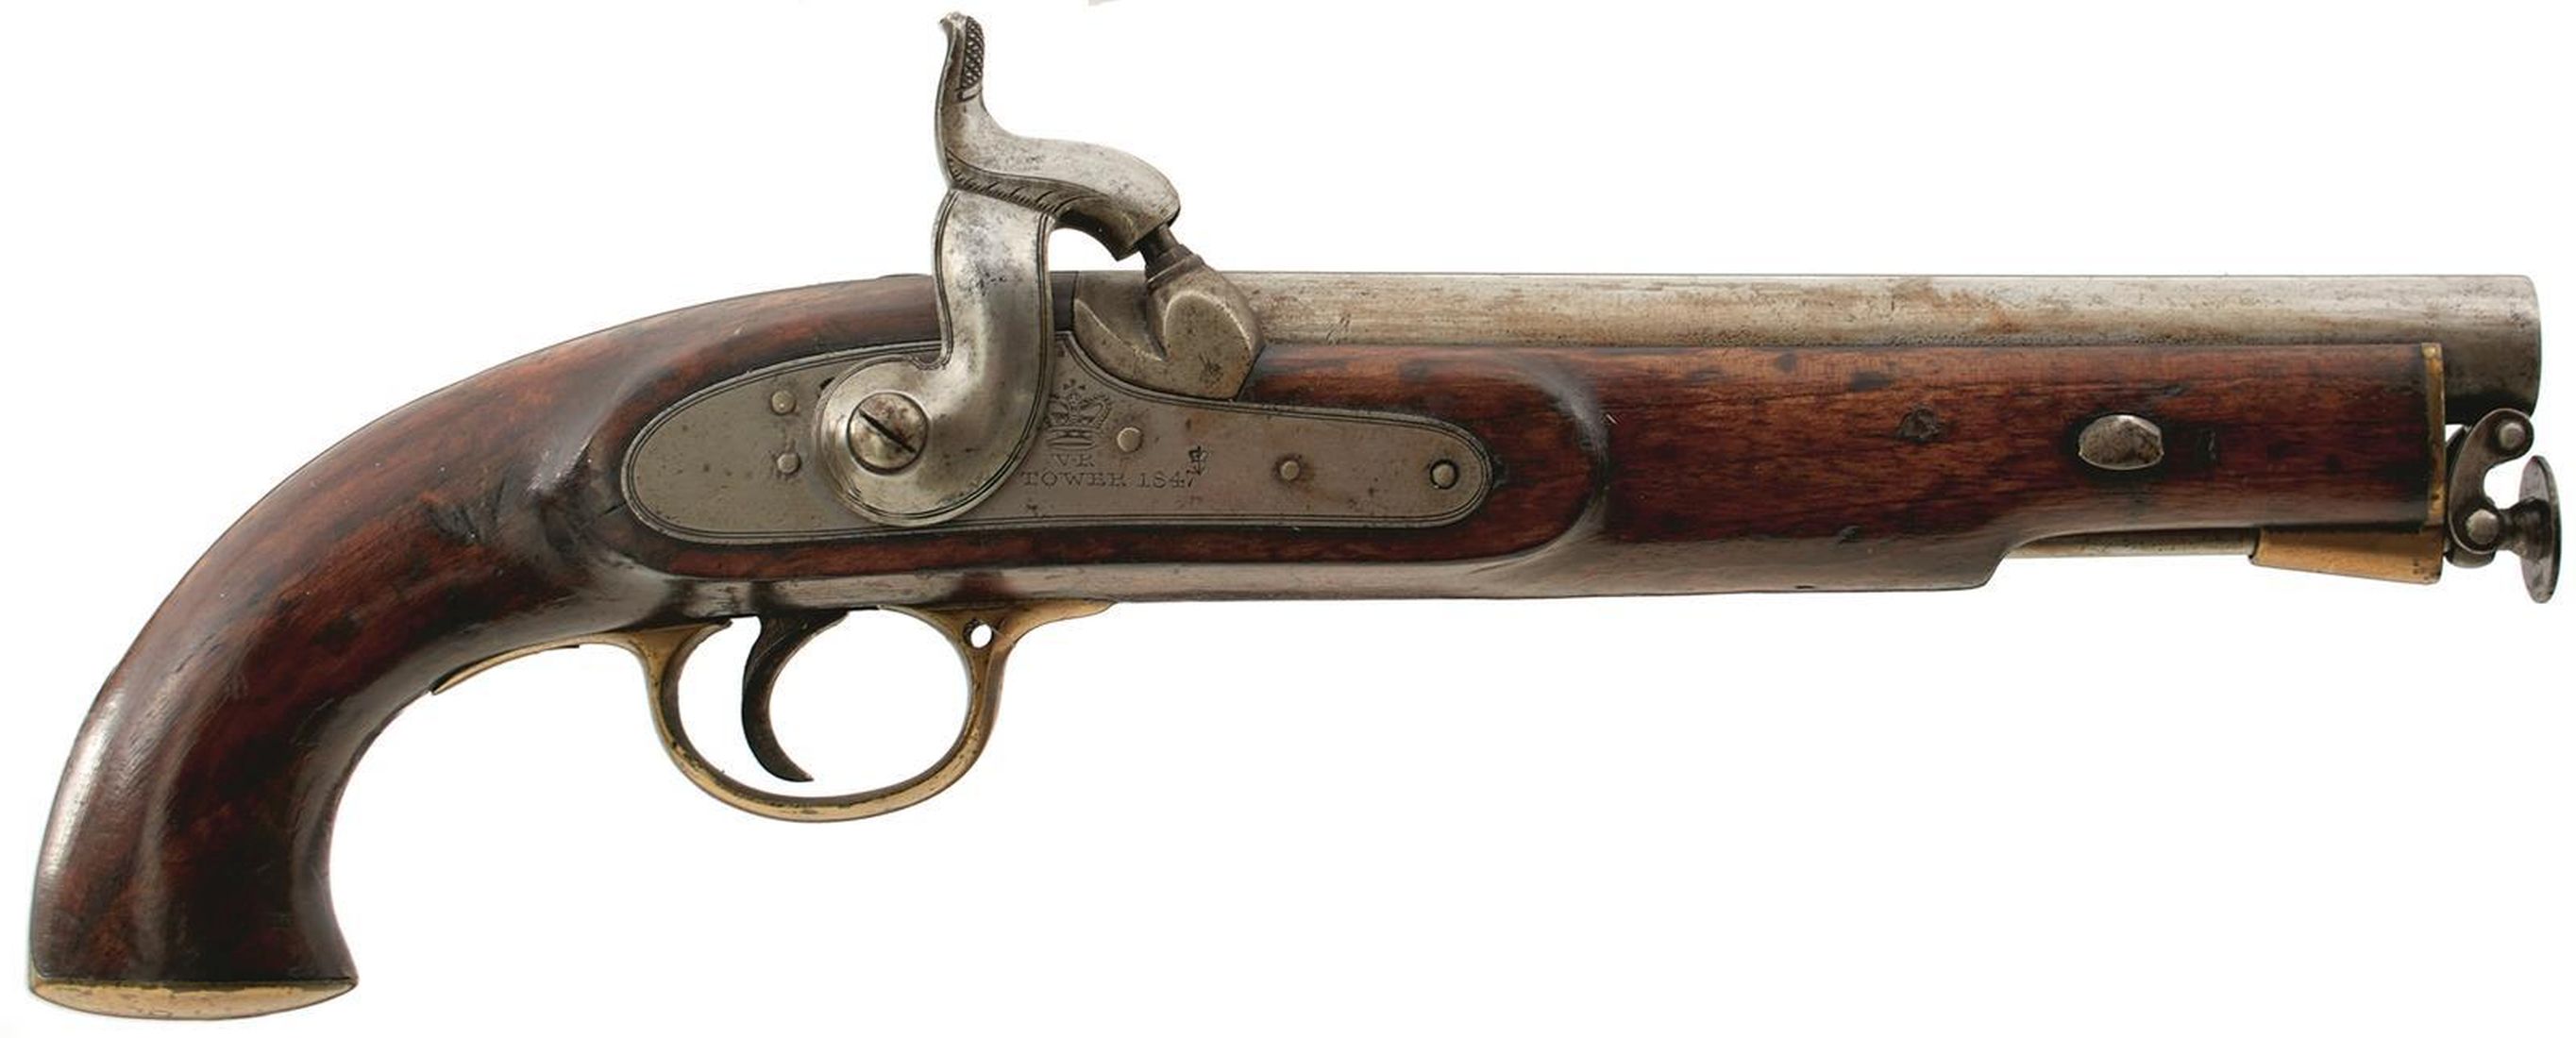 A RARE .753 CALIBRE PATTERN 1842 LANCER'S PISTOL TO THE 16TH LANCERS, 9inch barrel stamped with